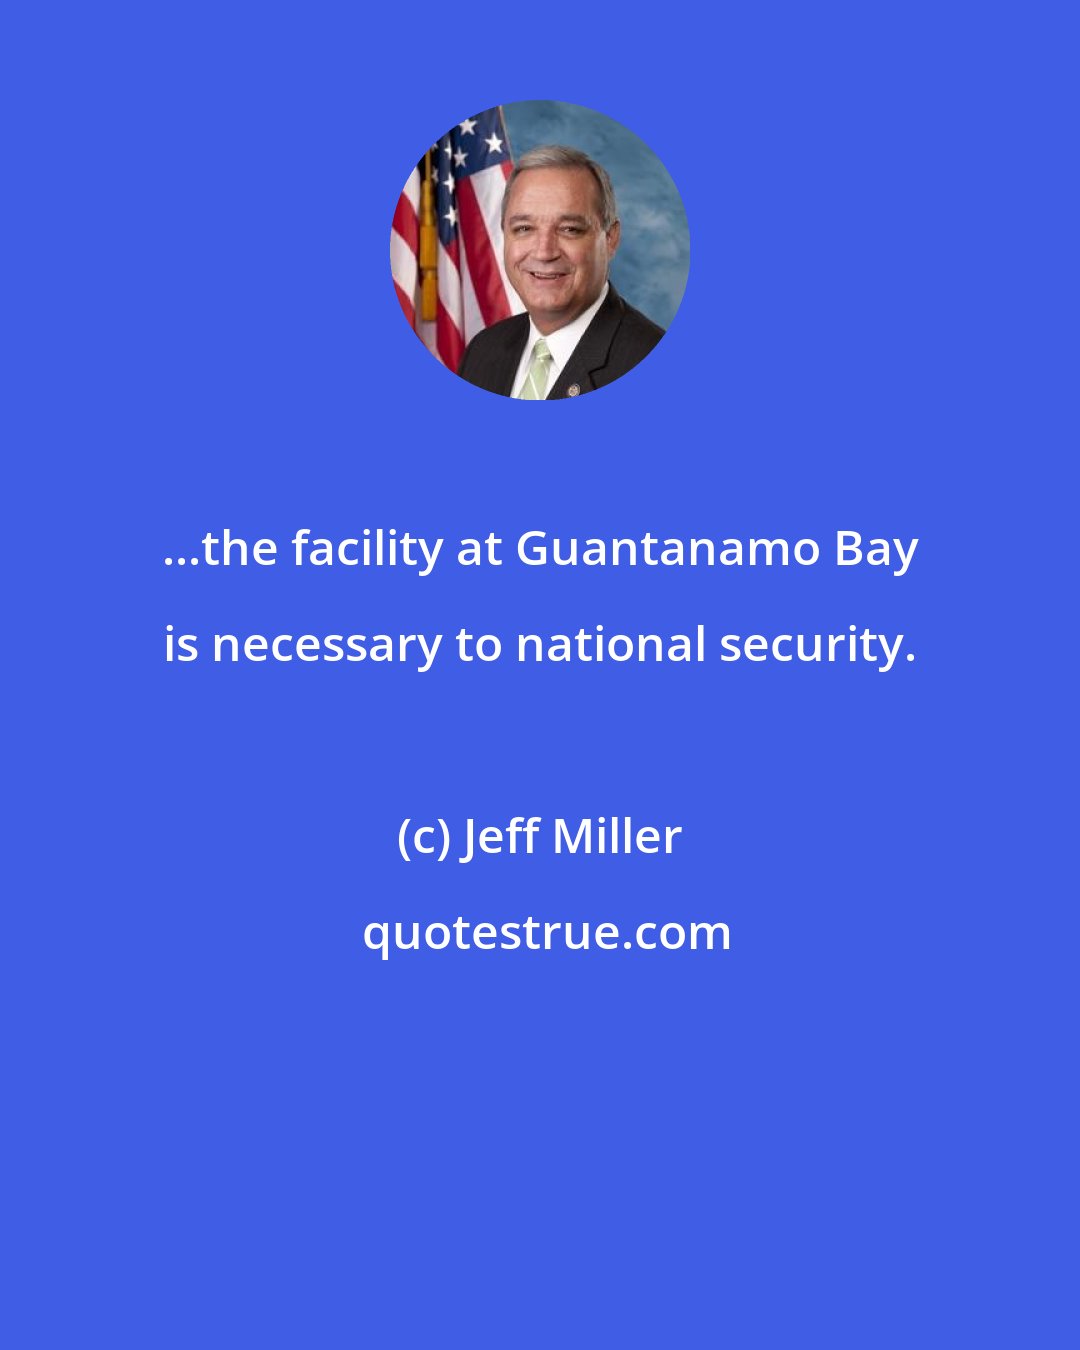 Jeff Miller: ...the facility at Guantanamo Bay is necessary to national security.